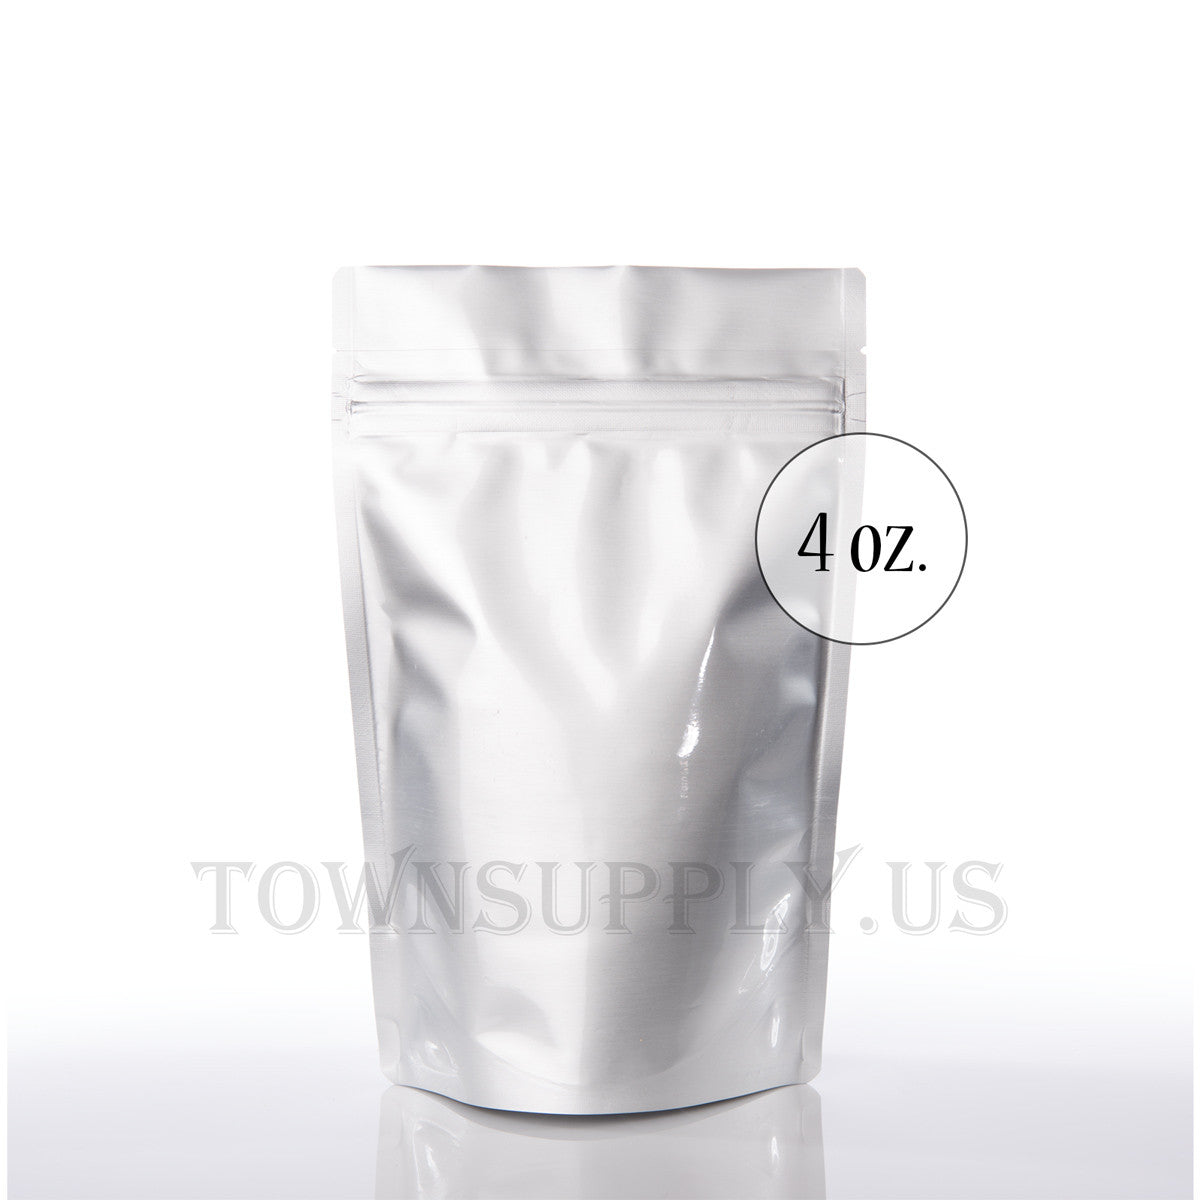 shiny silver resealable stand up pouch, 4 oz. bags - Town Supply